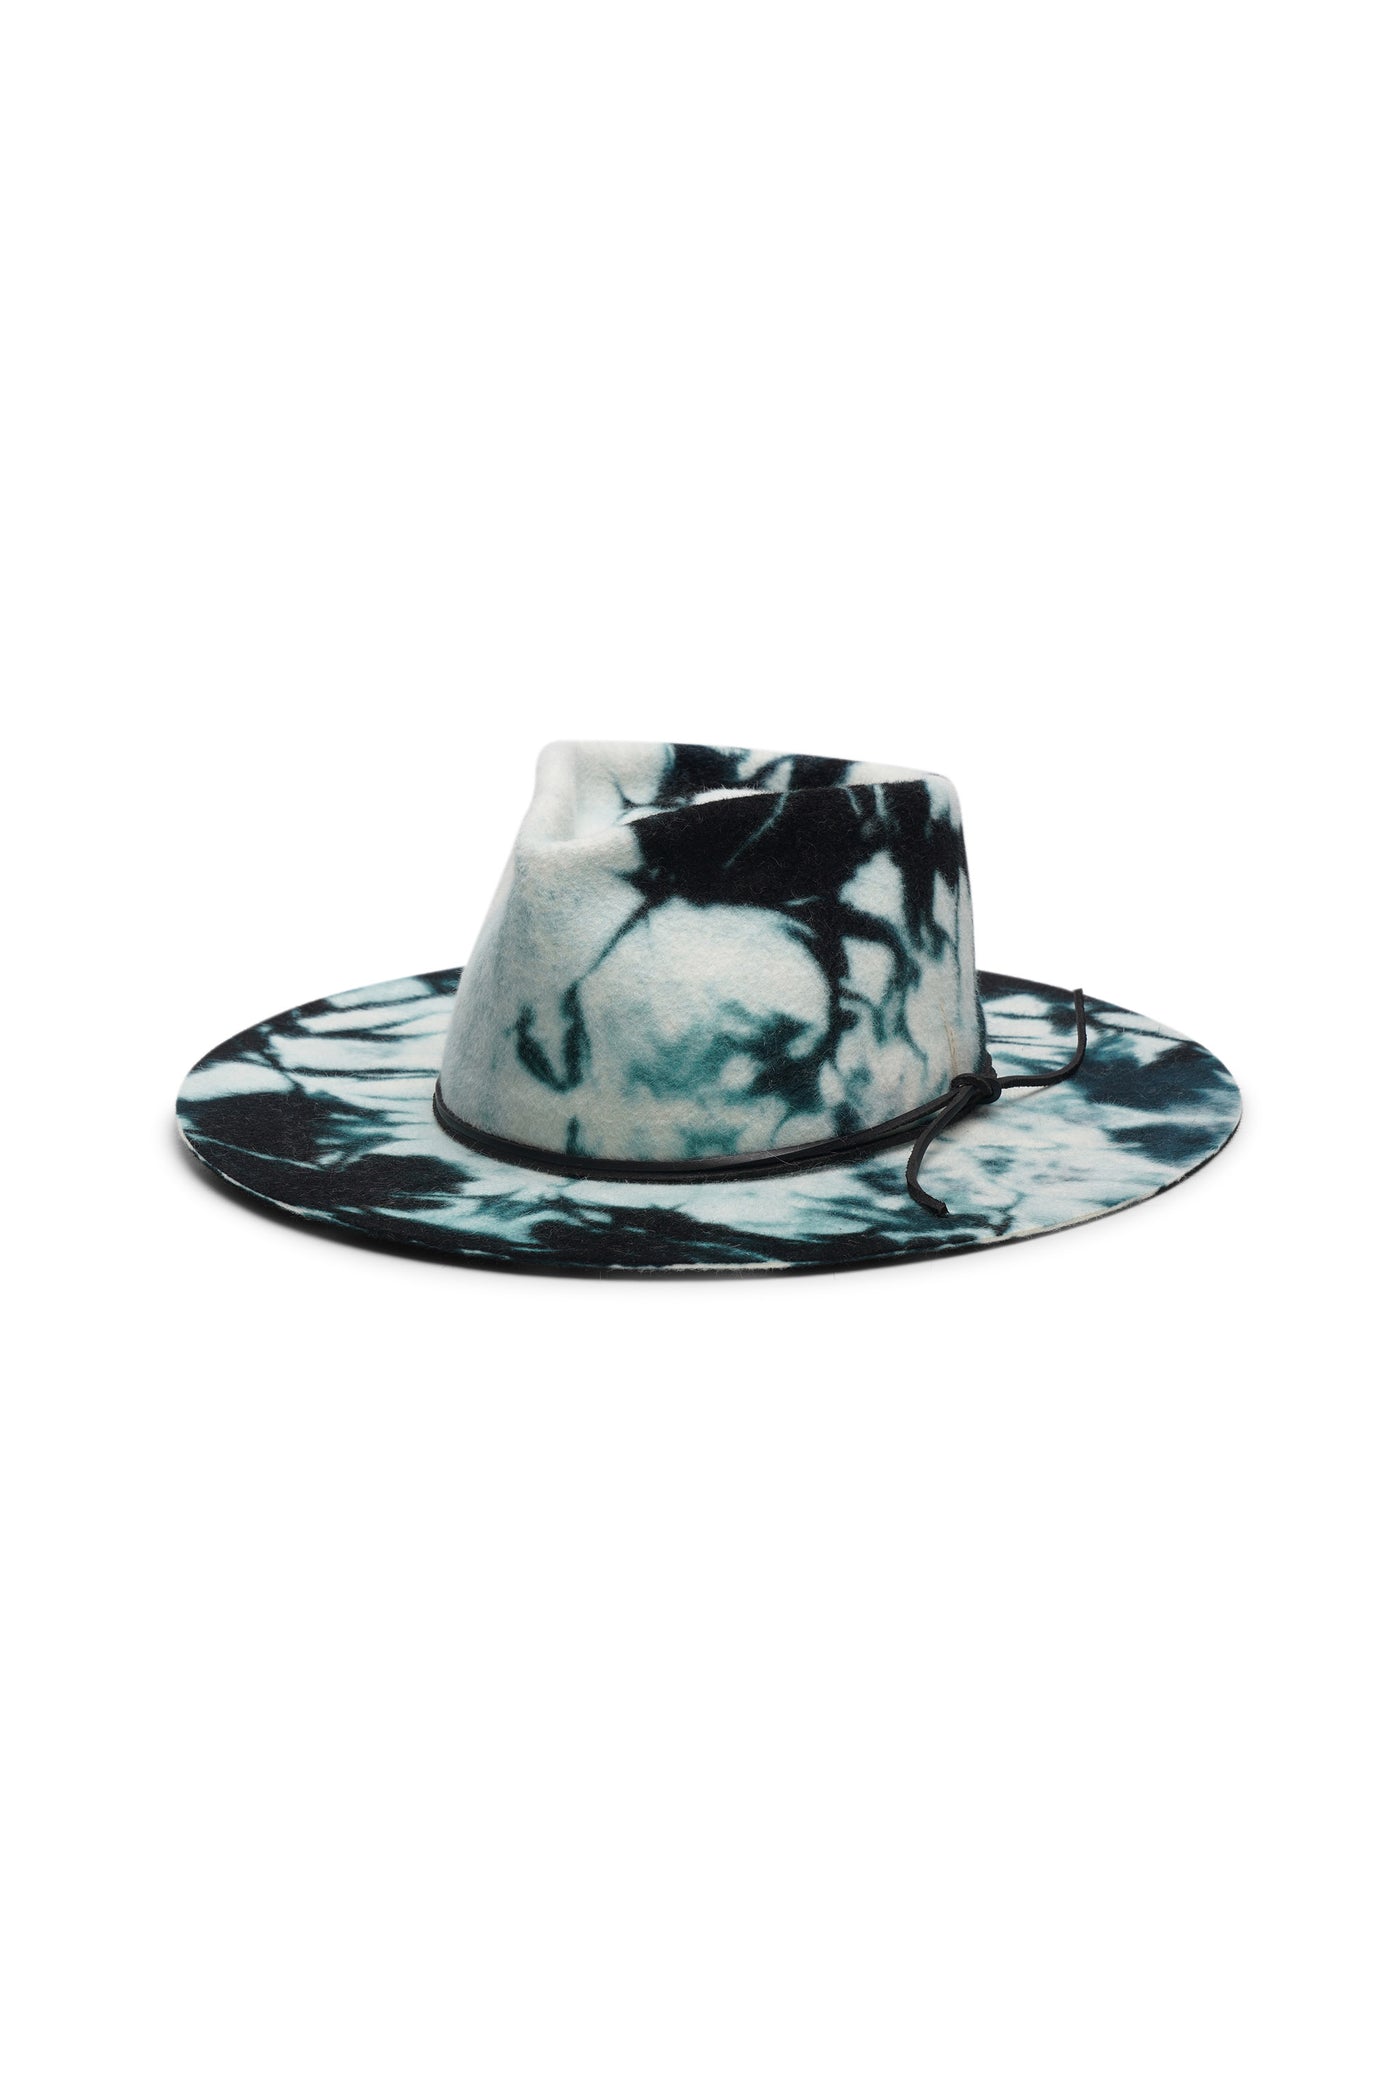 White and green tie dye fur felt fedora hat with a wide brim and tear drop crown. Unisex hat style in various sizes and colors. We ship worldwide. Shop now. Each SoonNoon hat is handmade with unique character in Stockholm, Sweden.